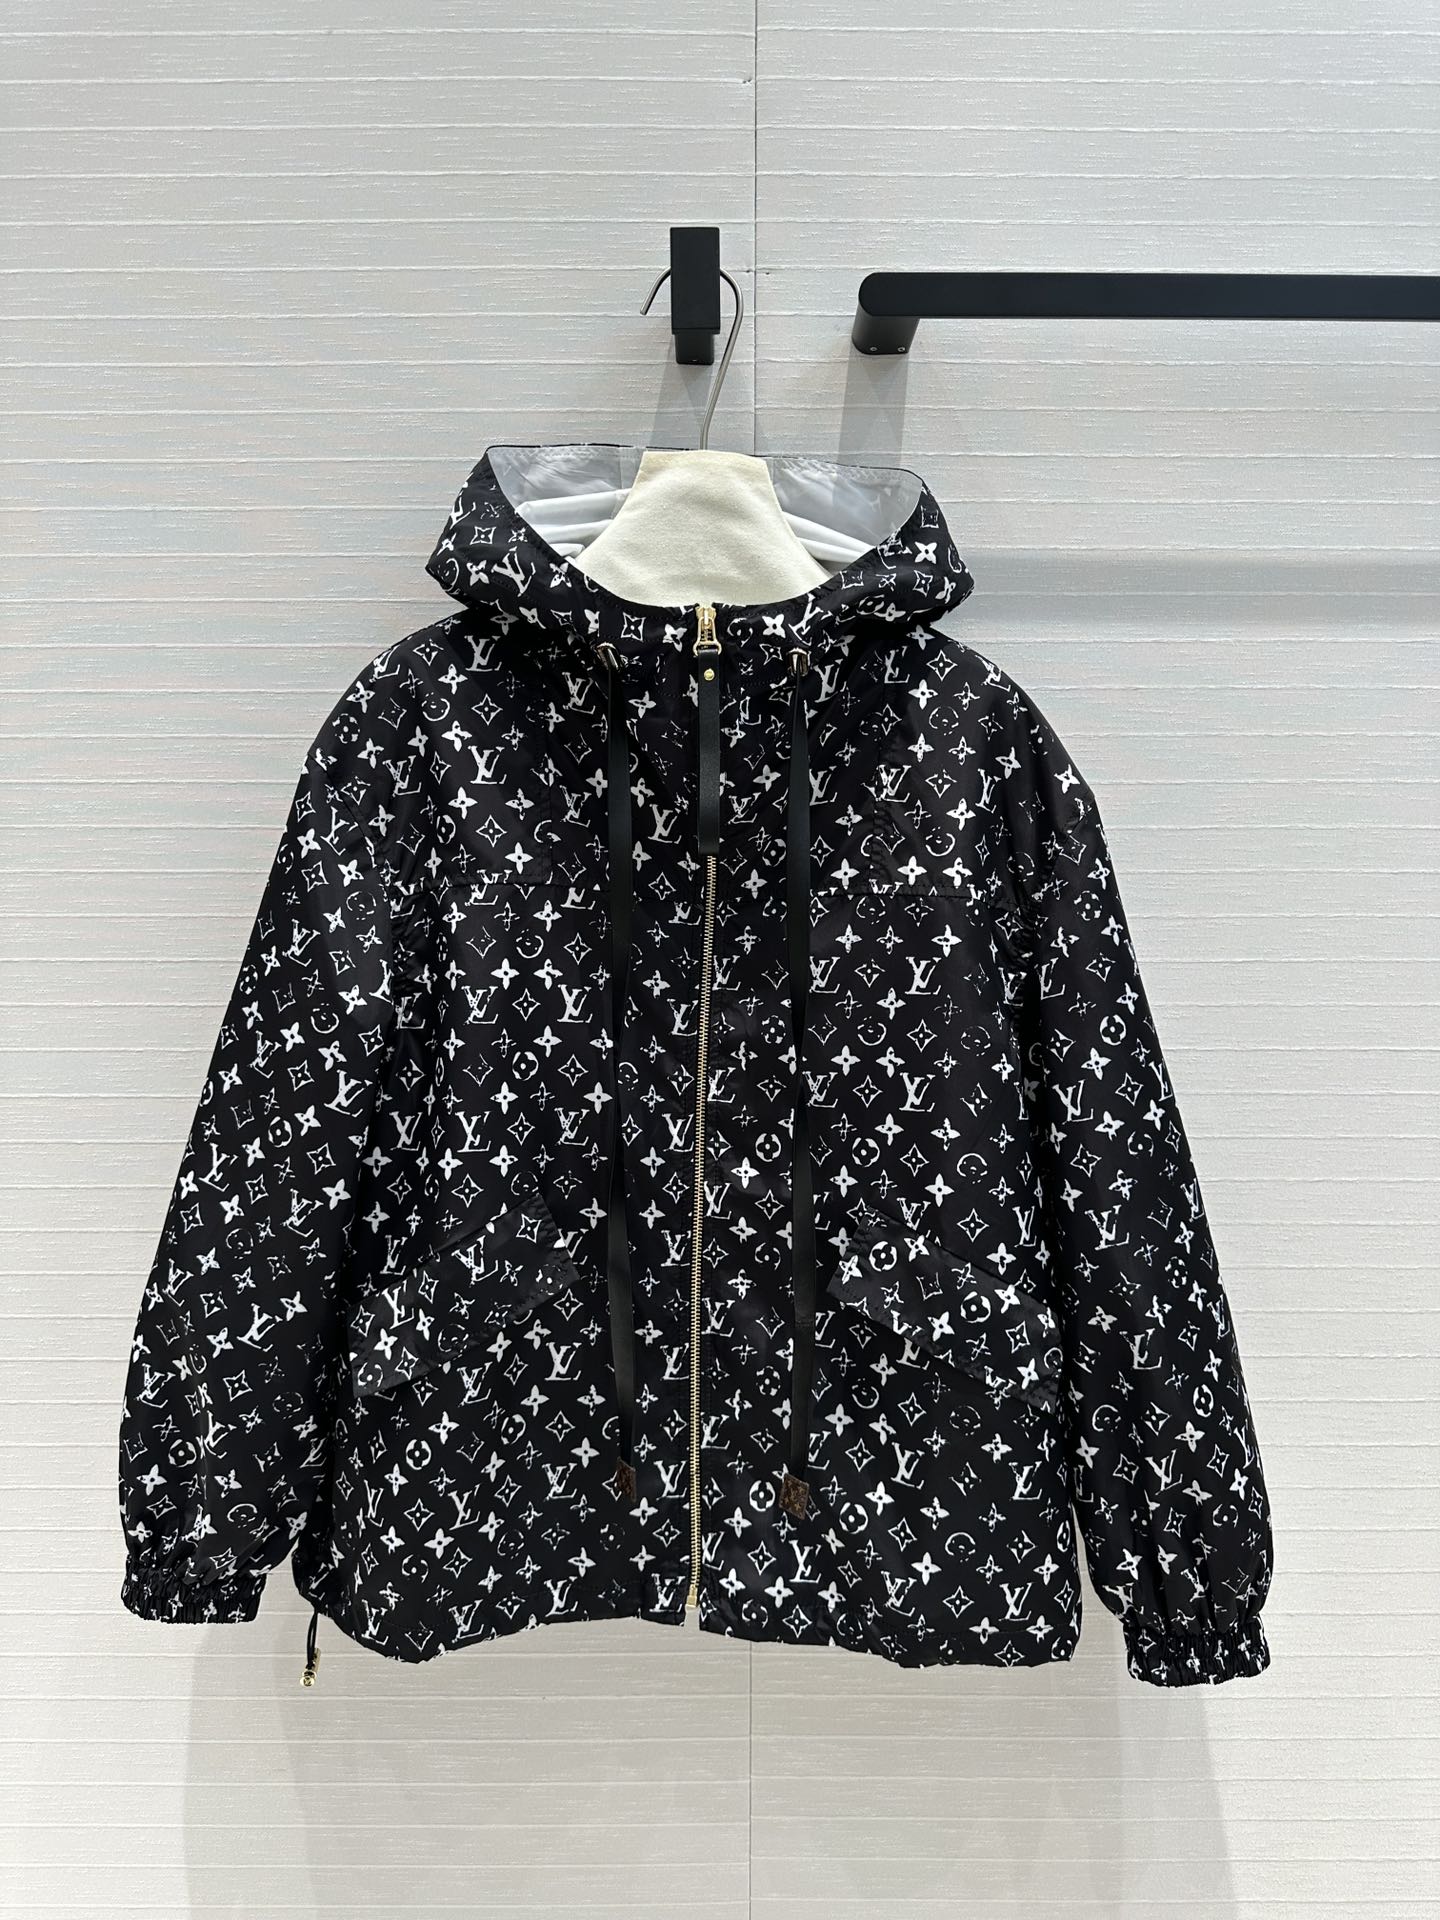 Louis Vuitton Coats & Jackets Sun Protection Clothing Black White Printing Hooded Top